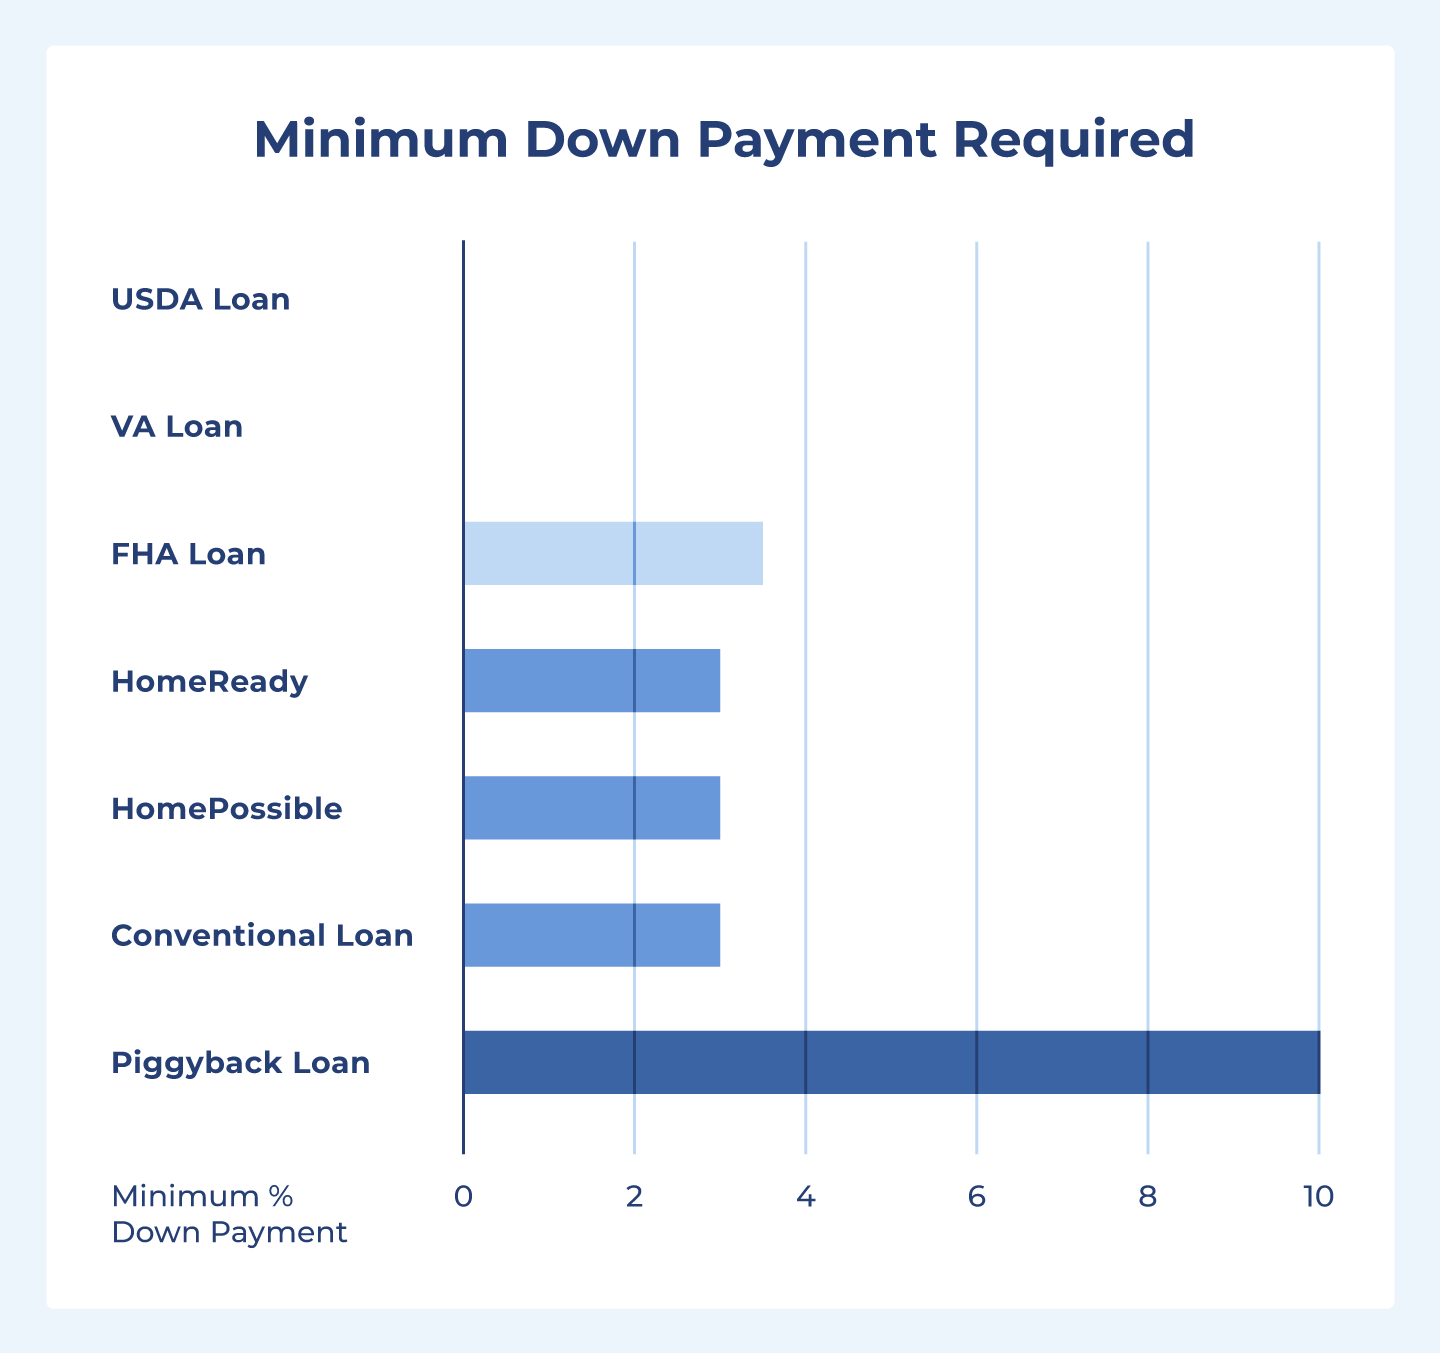 USDA and VA loans have a 0% minimum down payment. FHA loans have a 3.5% minimum. HomePossible and HomeReady have a 3% minimum. Conventional loans have a 3-10% minimum. Piggyback loans have a 10% minimum.